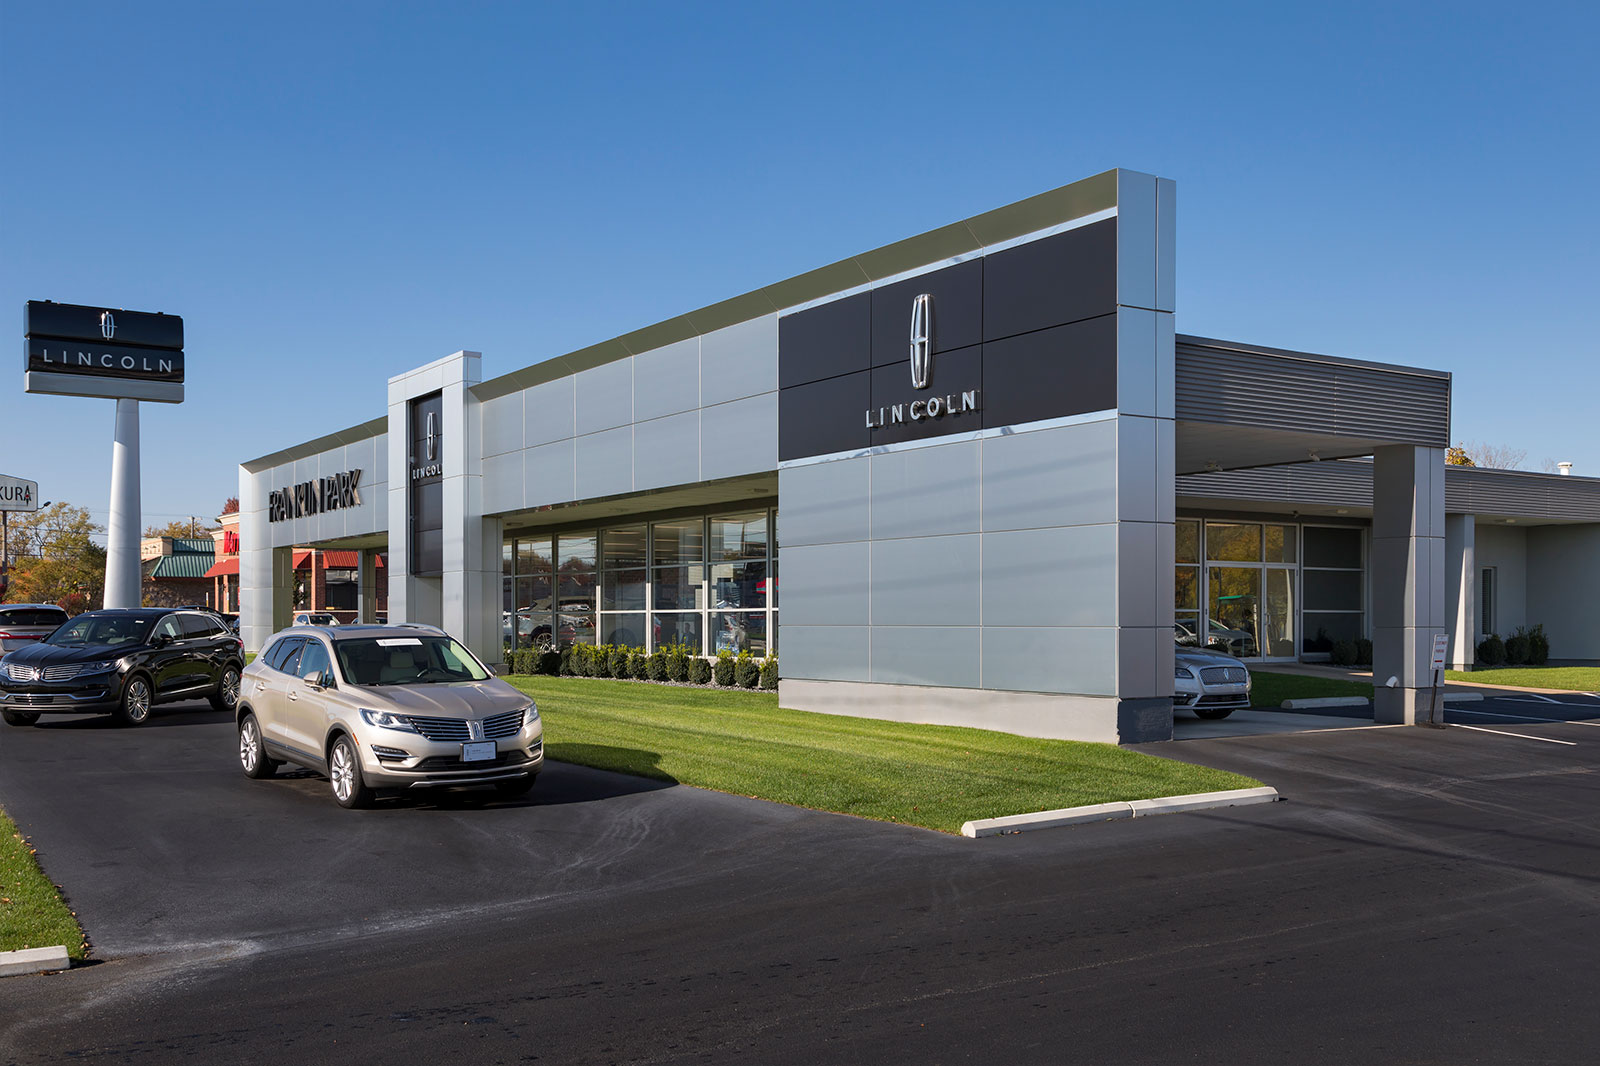 Auto dealership commercial construction work by Miller Diversified